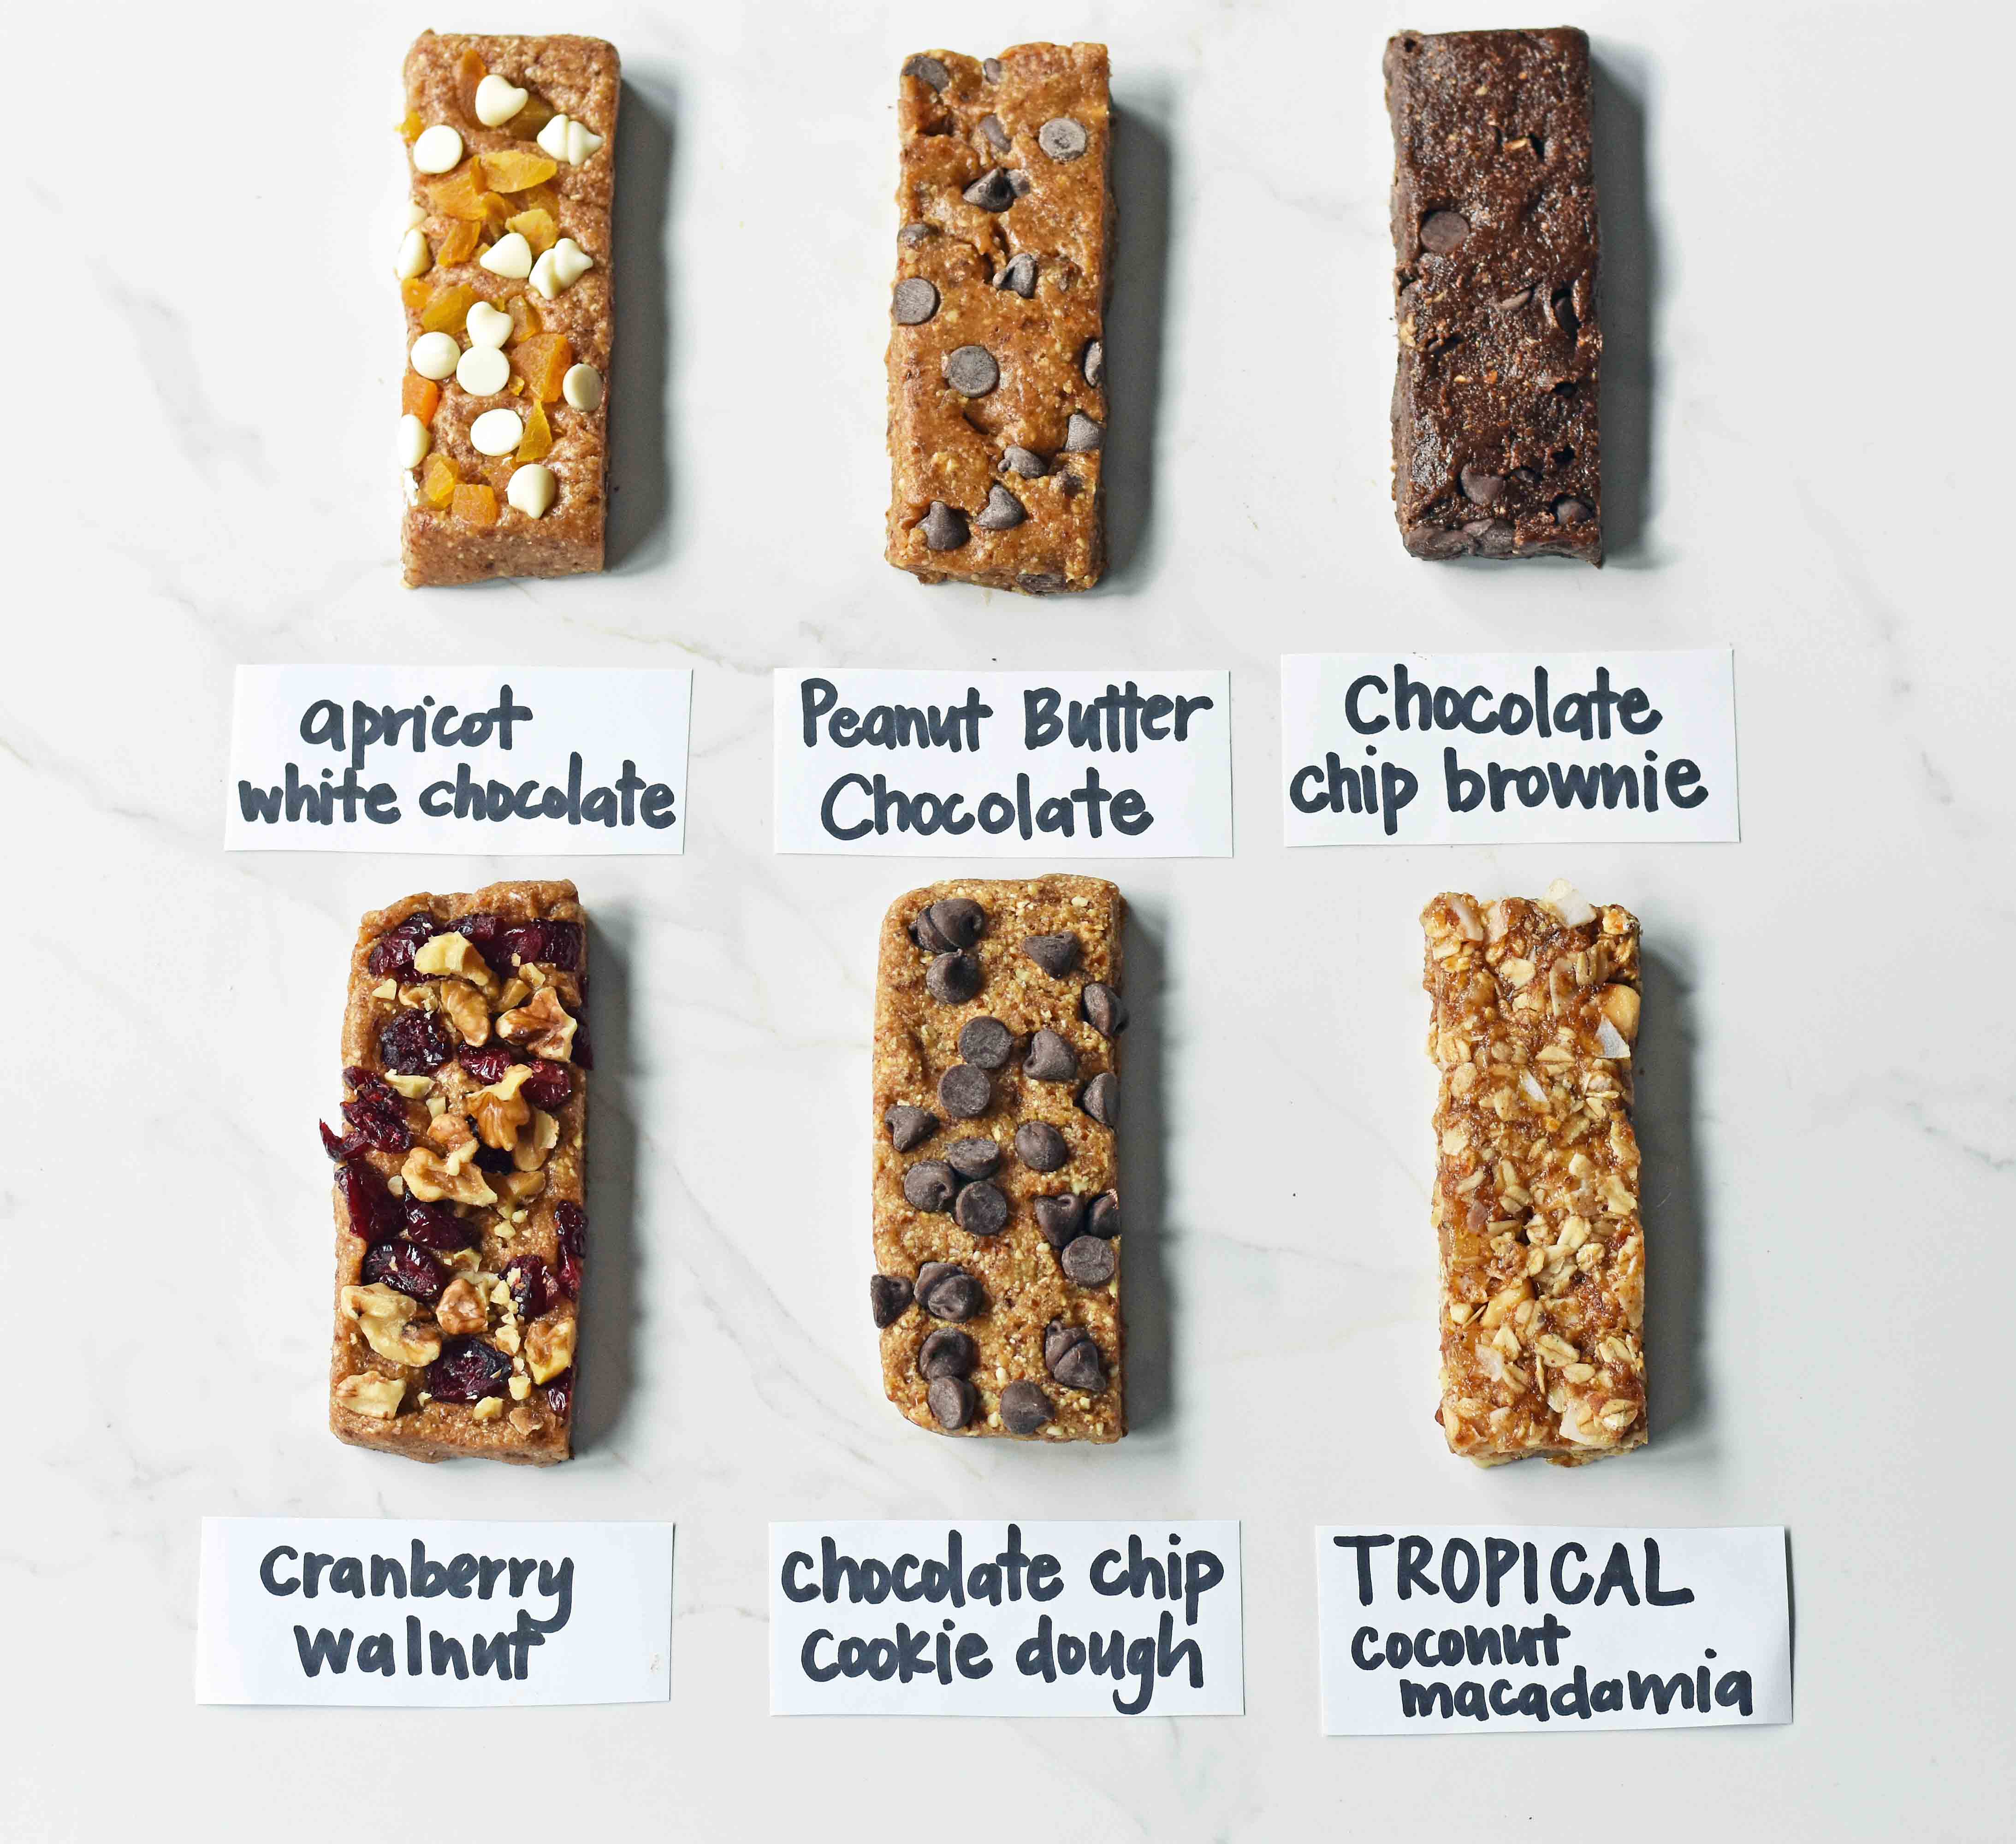 I. Introduction to DIY Energy Bars